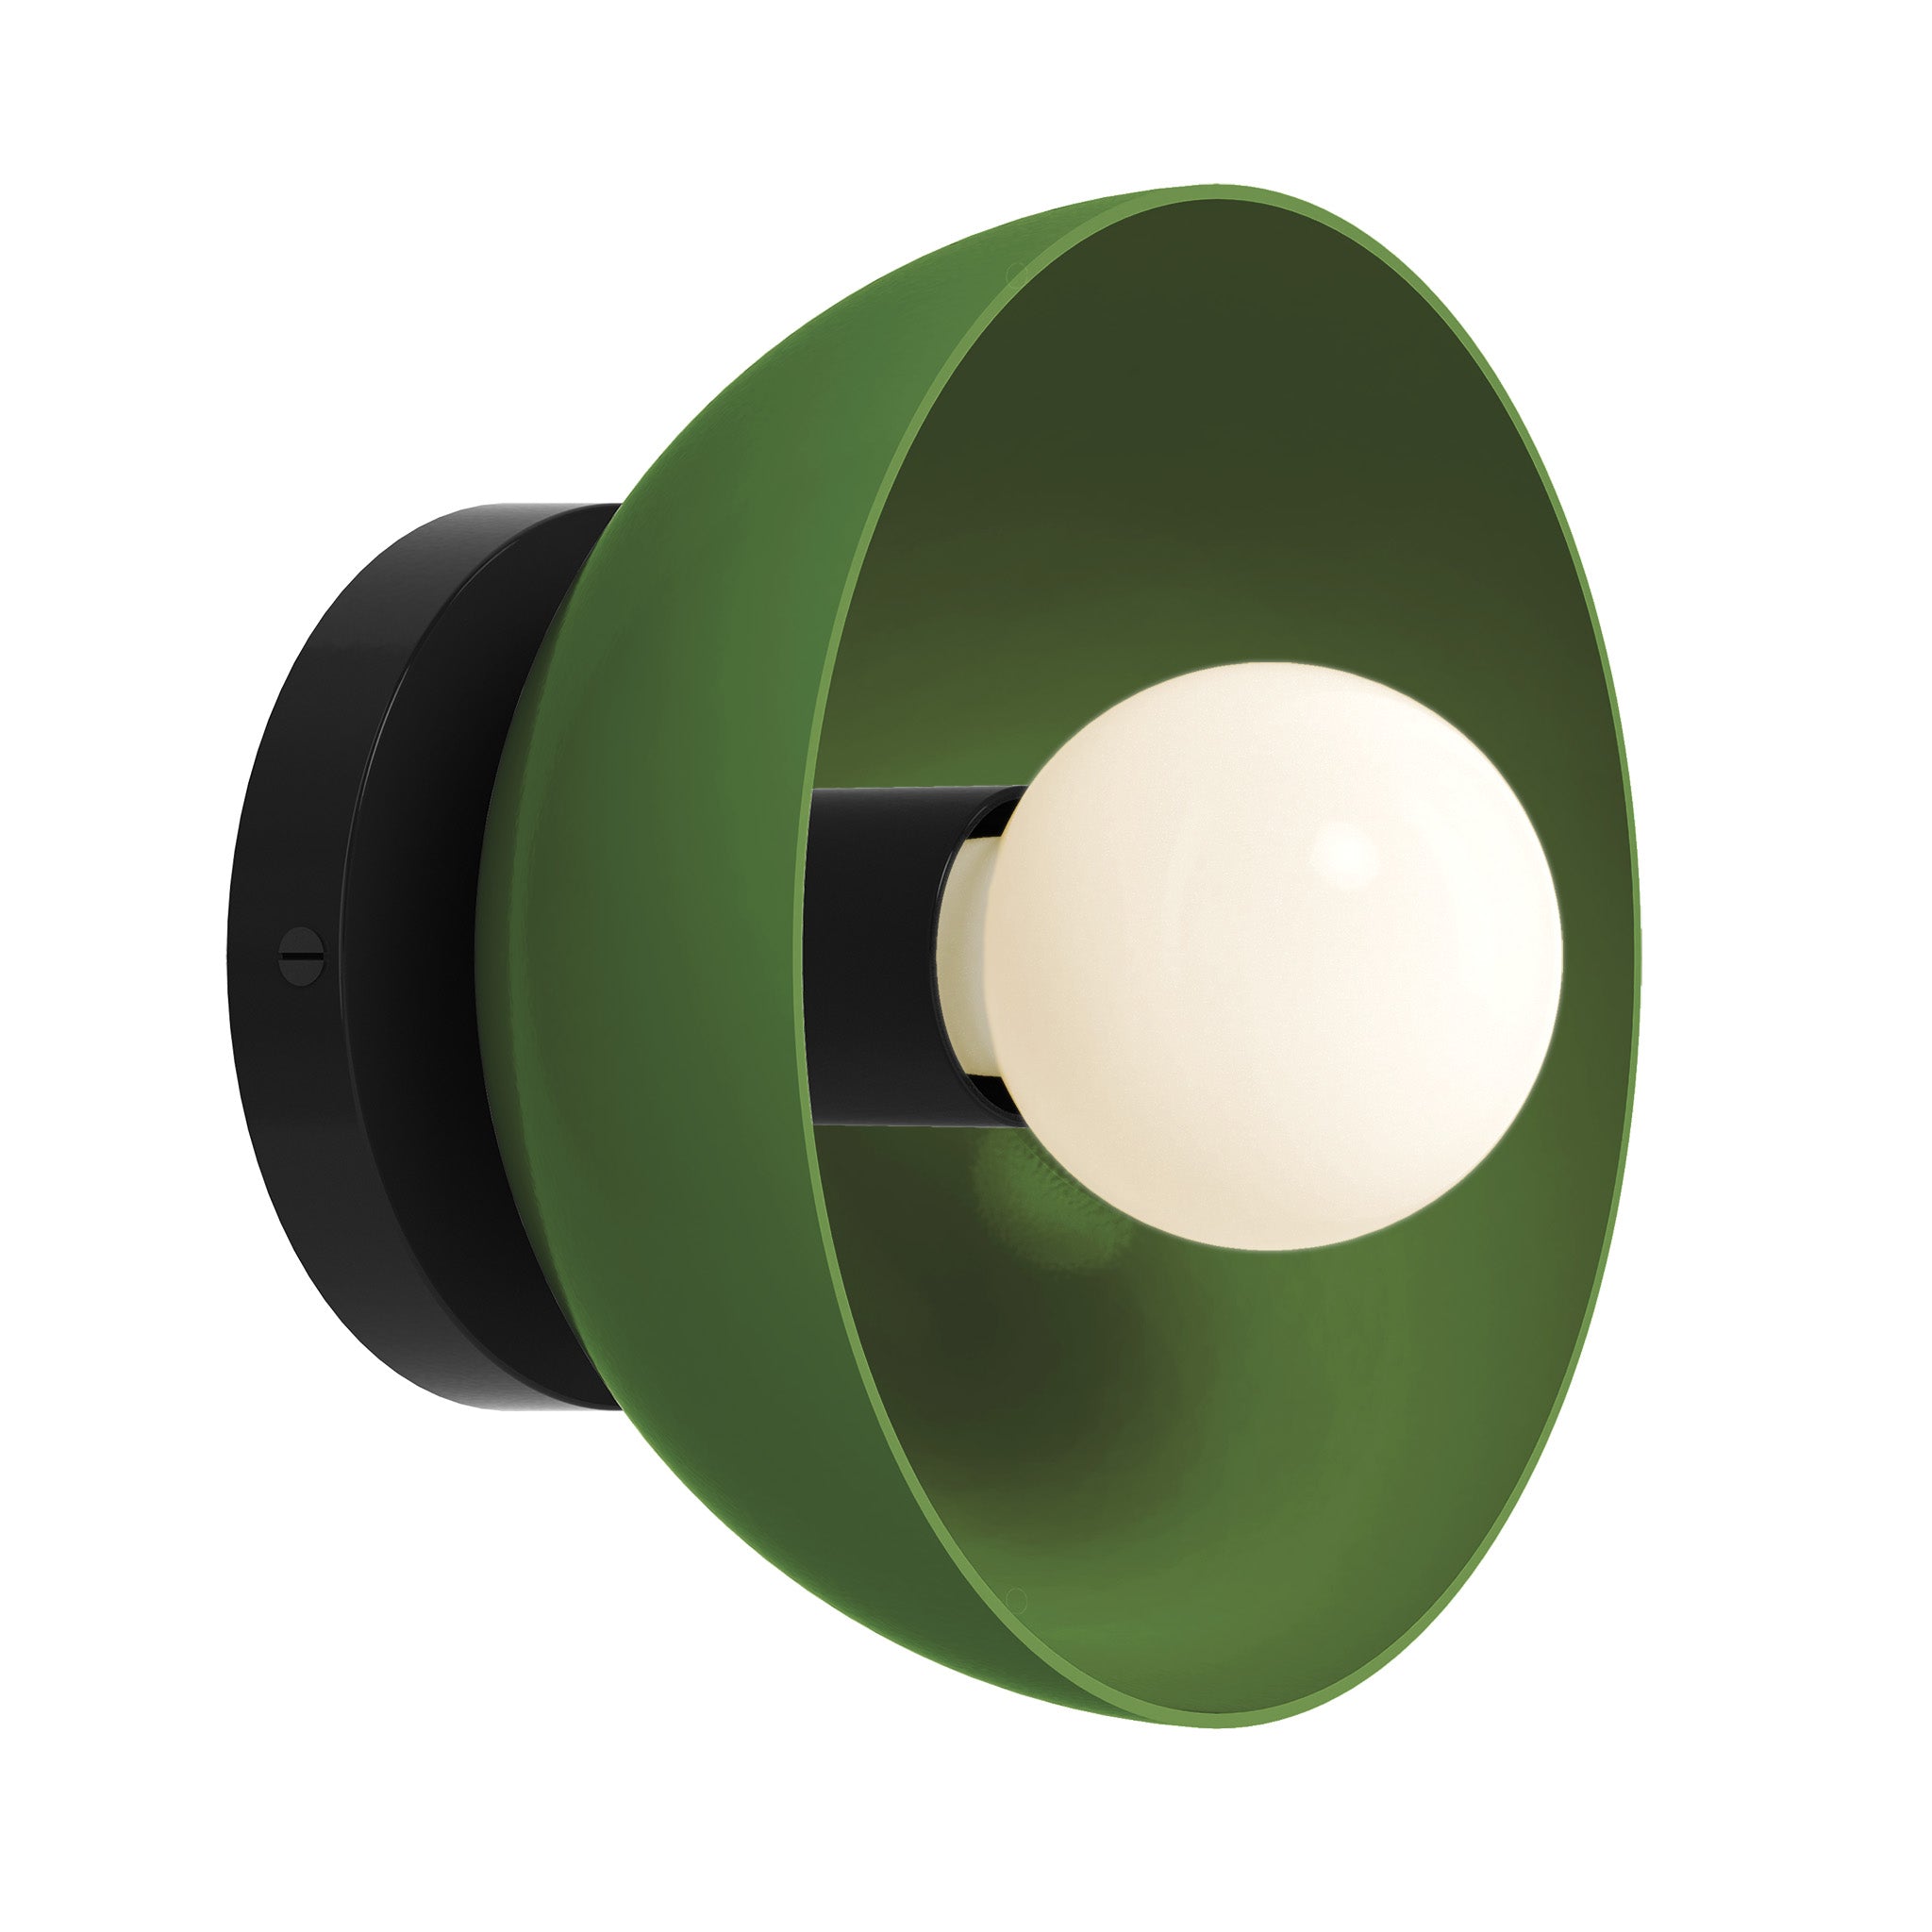 Black and python green color Hemi sconce 8" Dutton Brown lighting